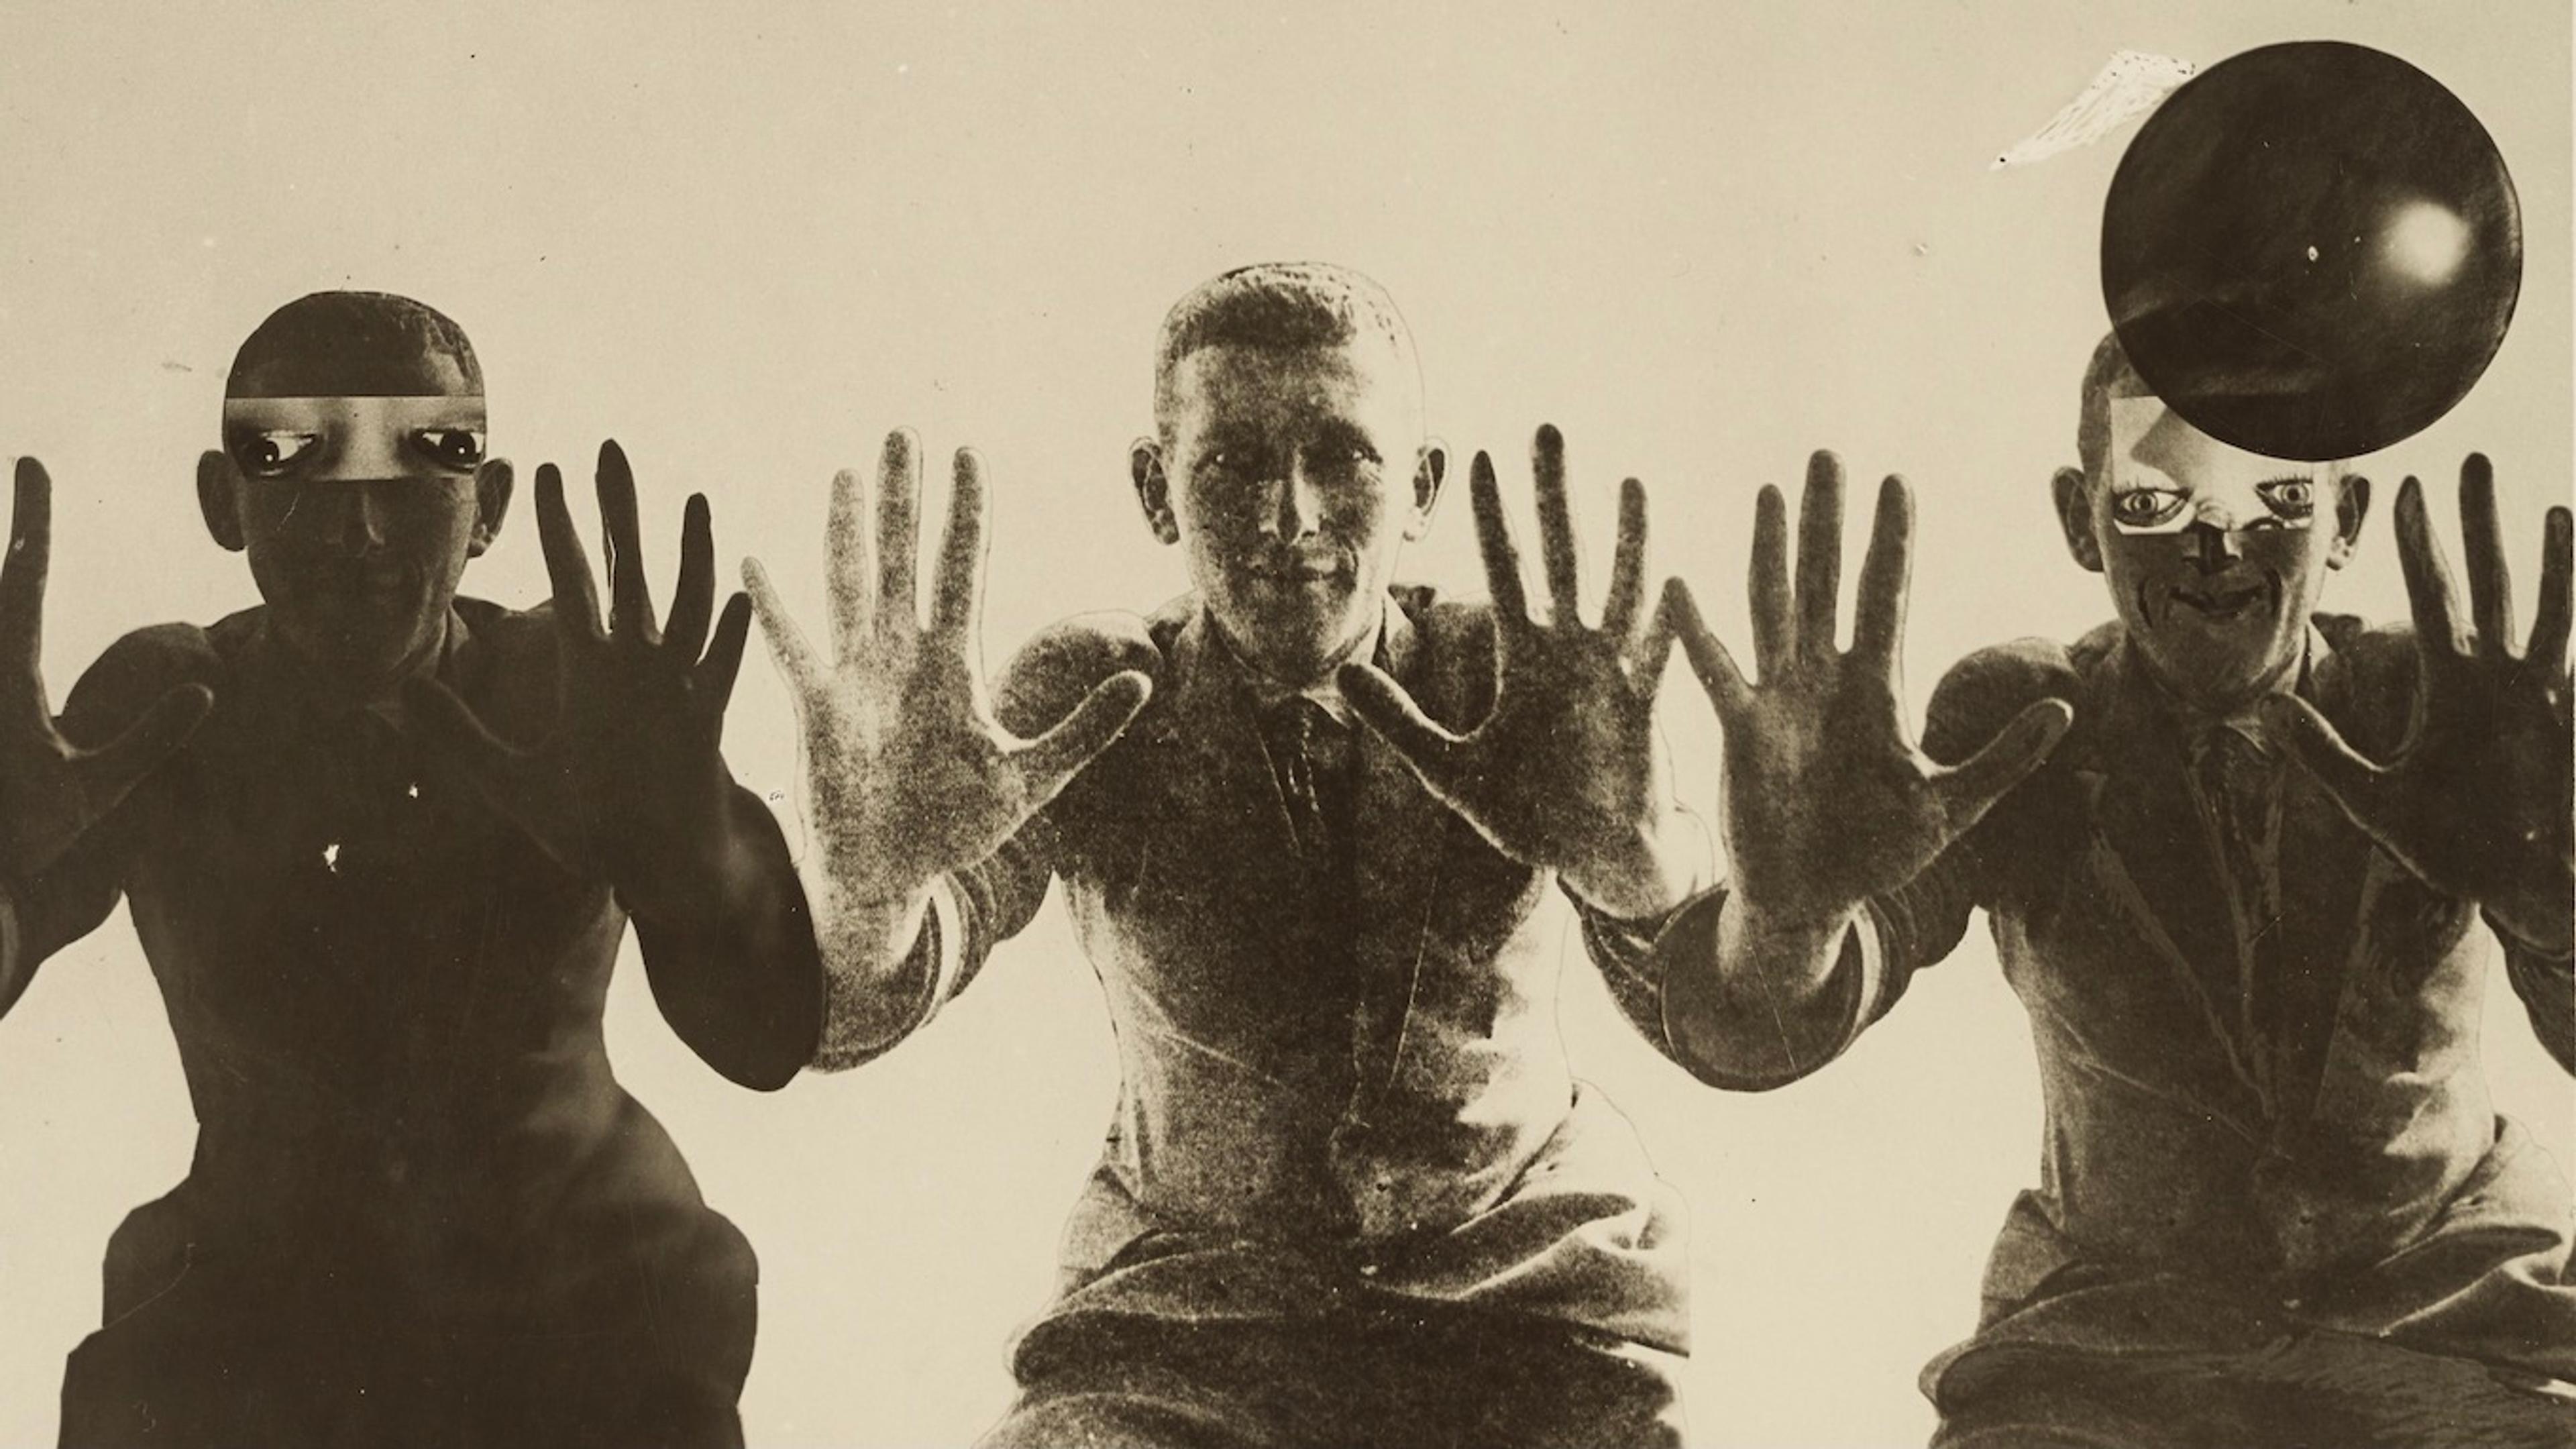 A sepia photographic collage featuring three men raising their hands